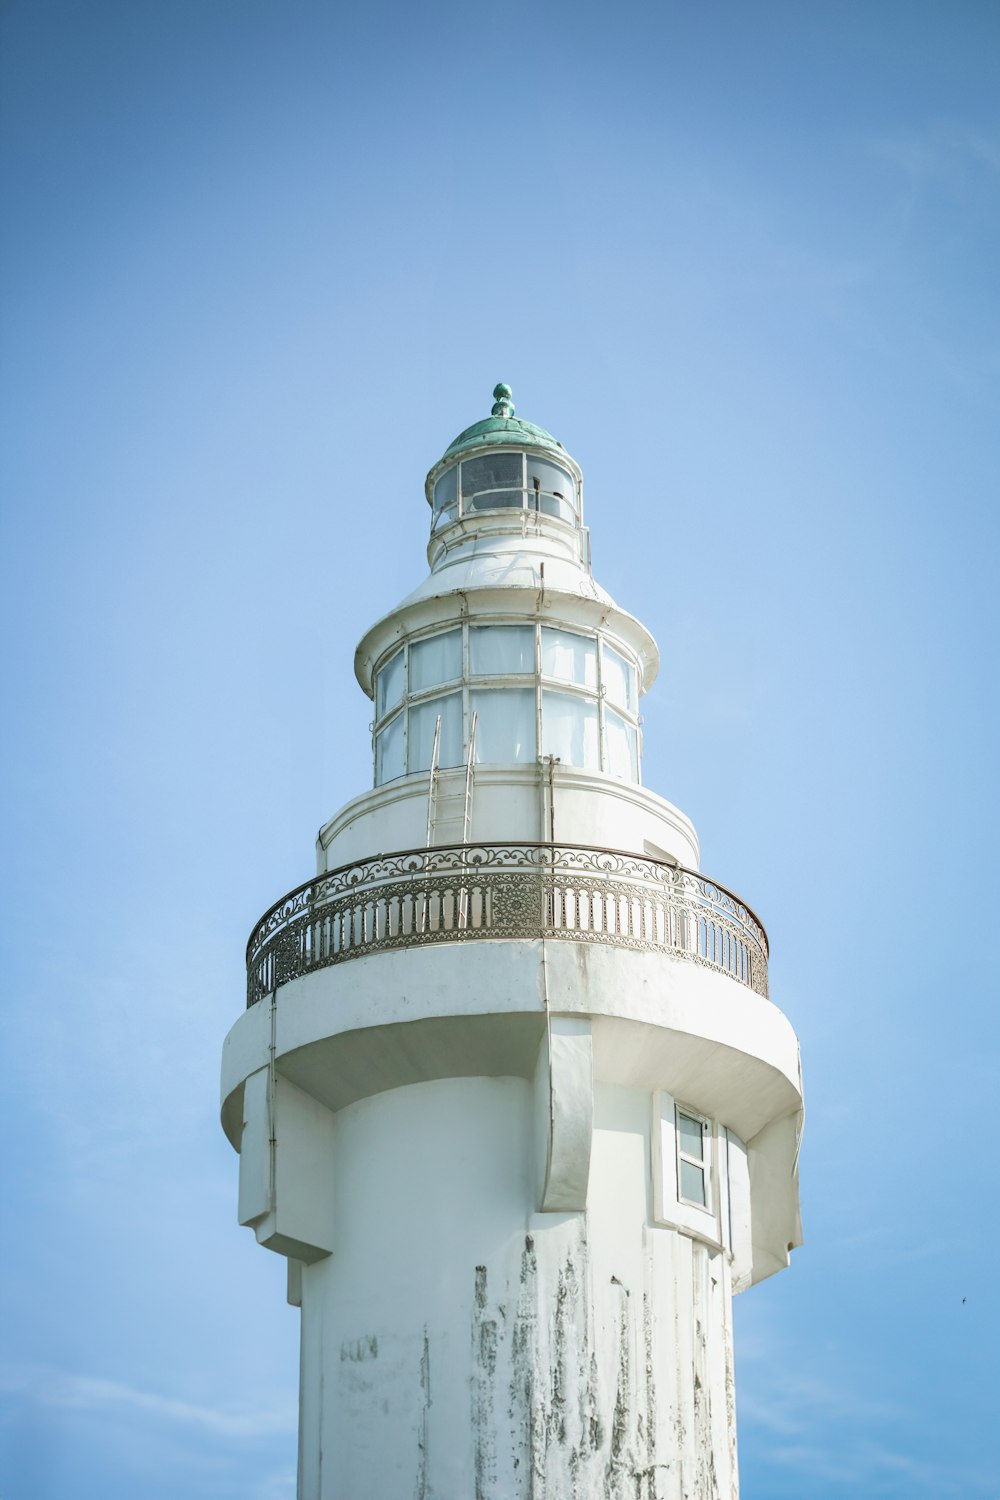 a white lighthouse with a green top against a blue sky